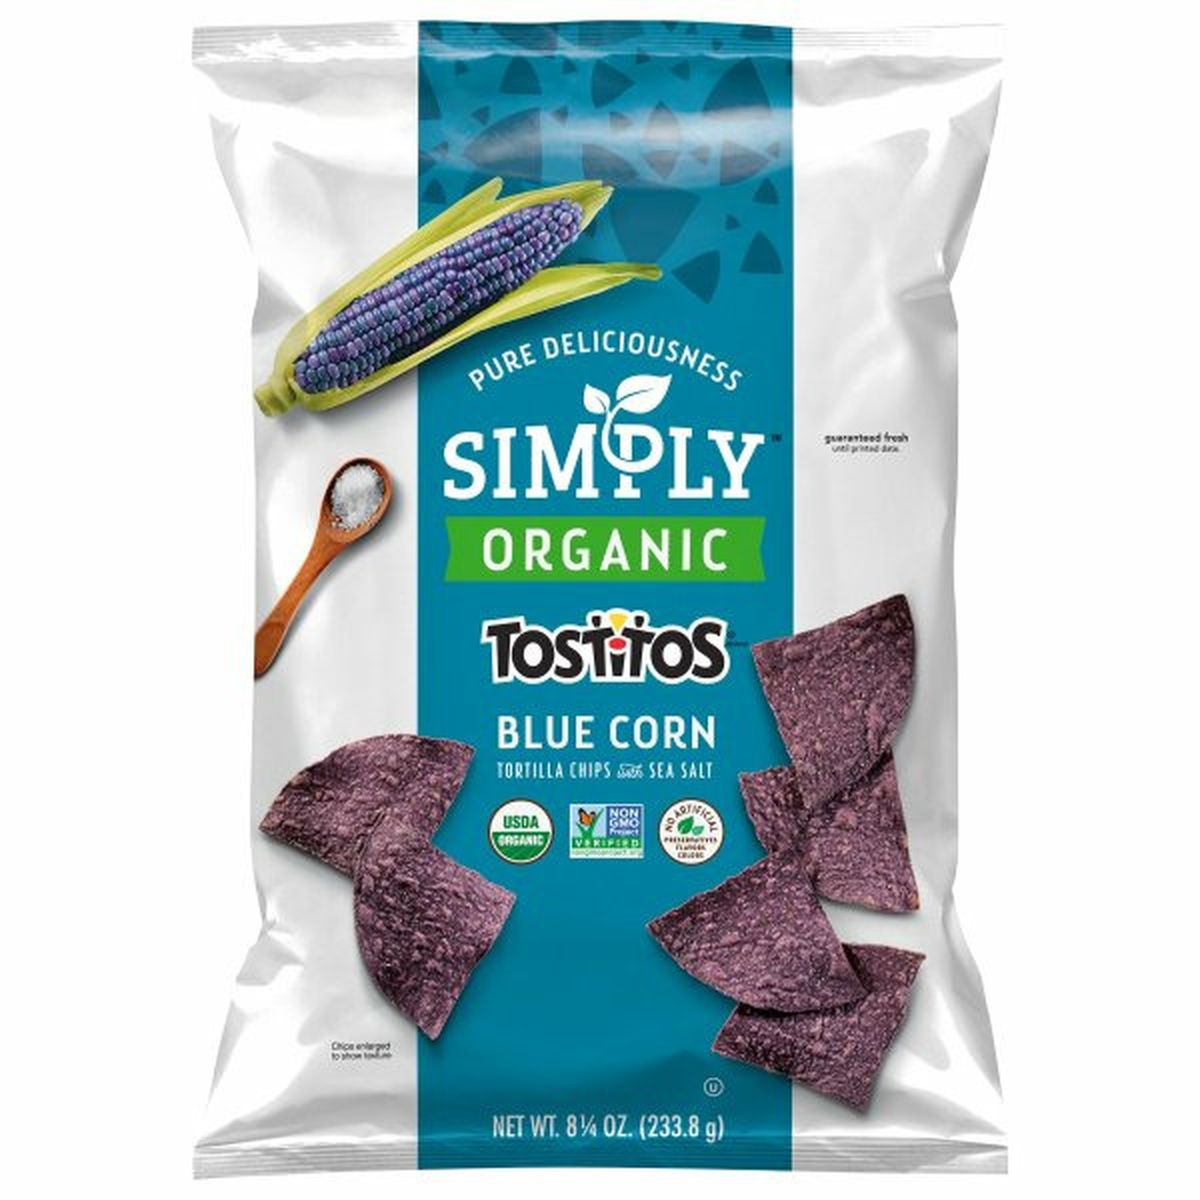 Calories in Tostitos Tortilla Chips with Sea Salt, Blue Corn